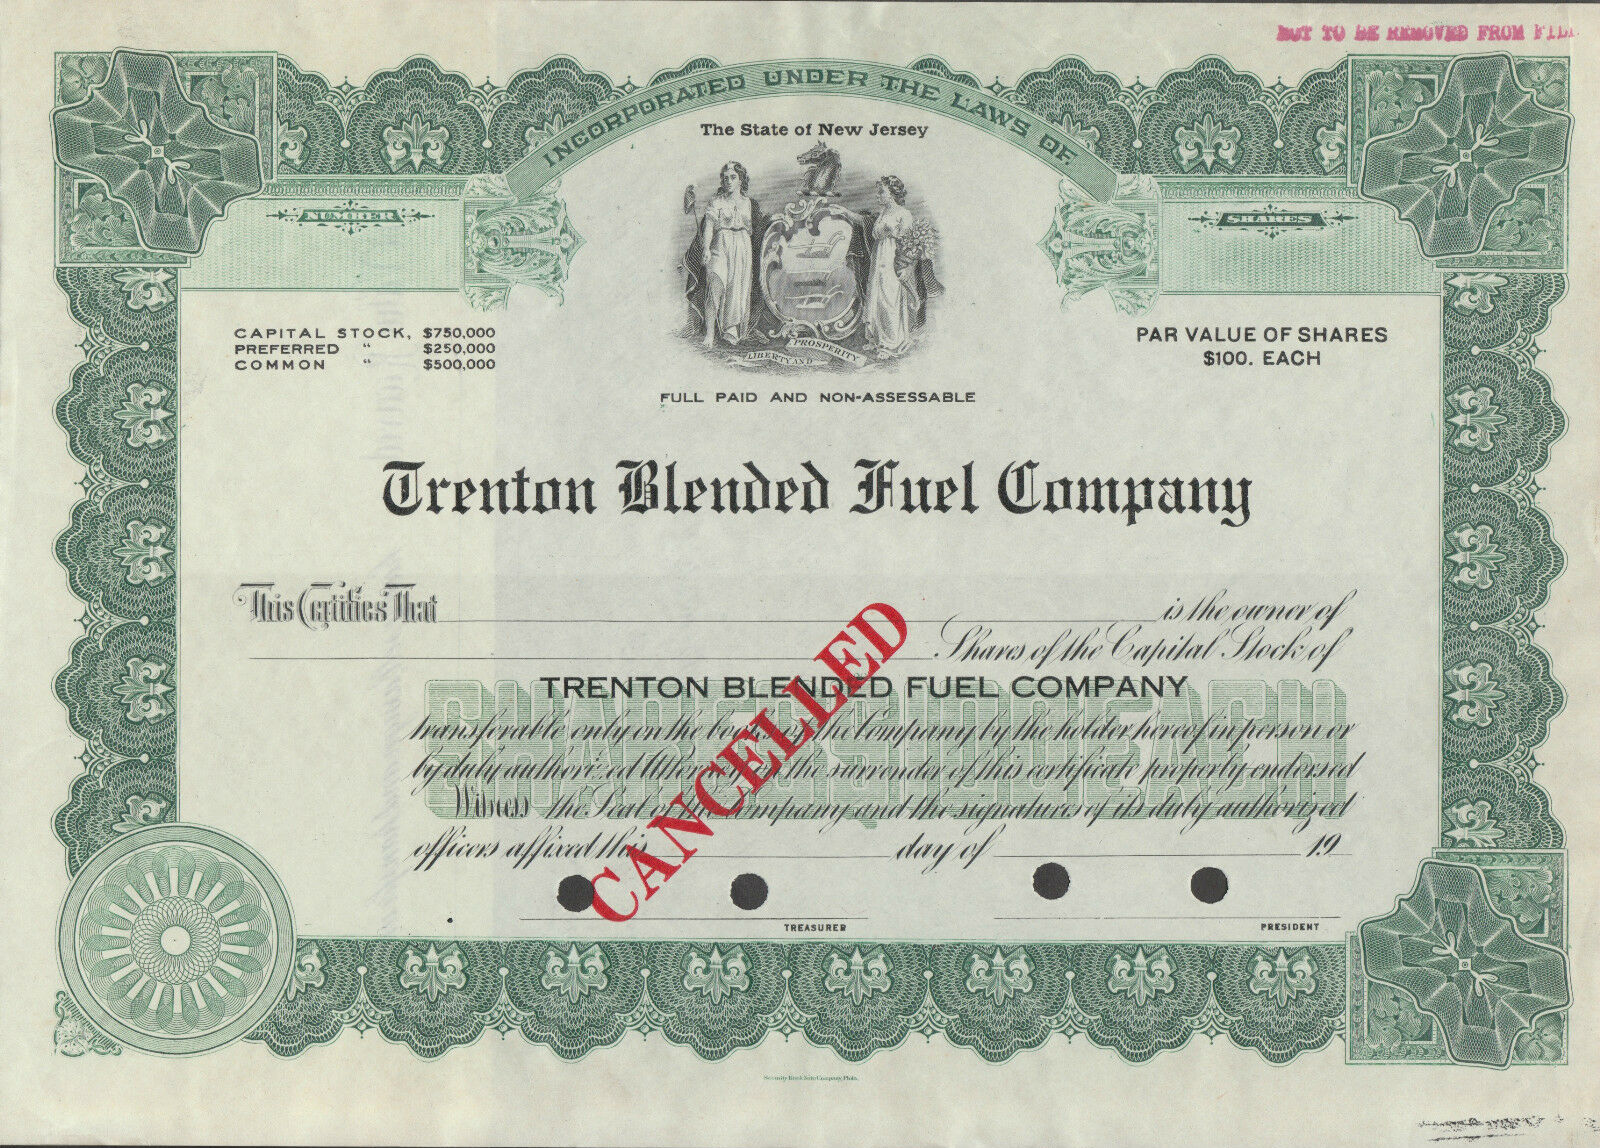 2 Diff. Colors "trenton Blended Fuel Co." Cancelled Stock Certificate Bn7072